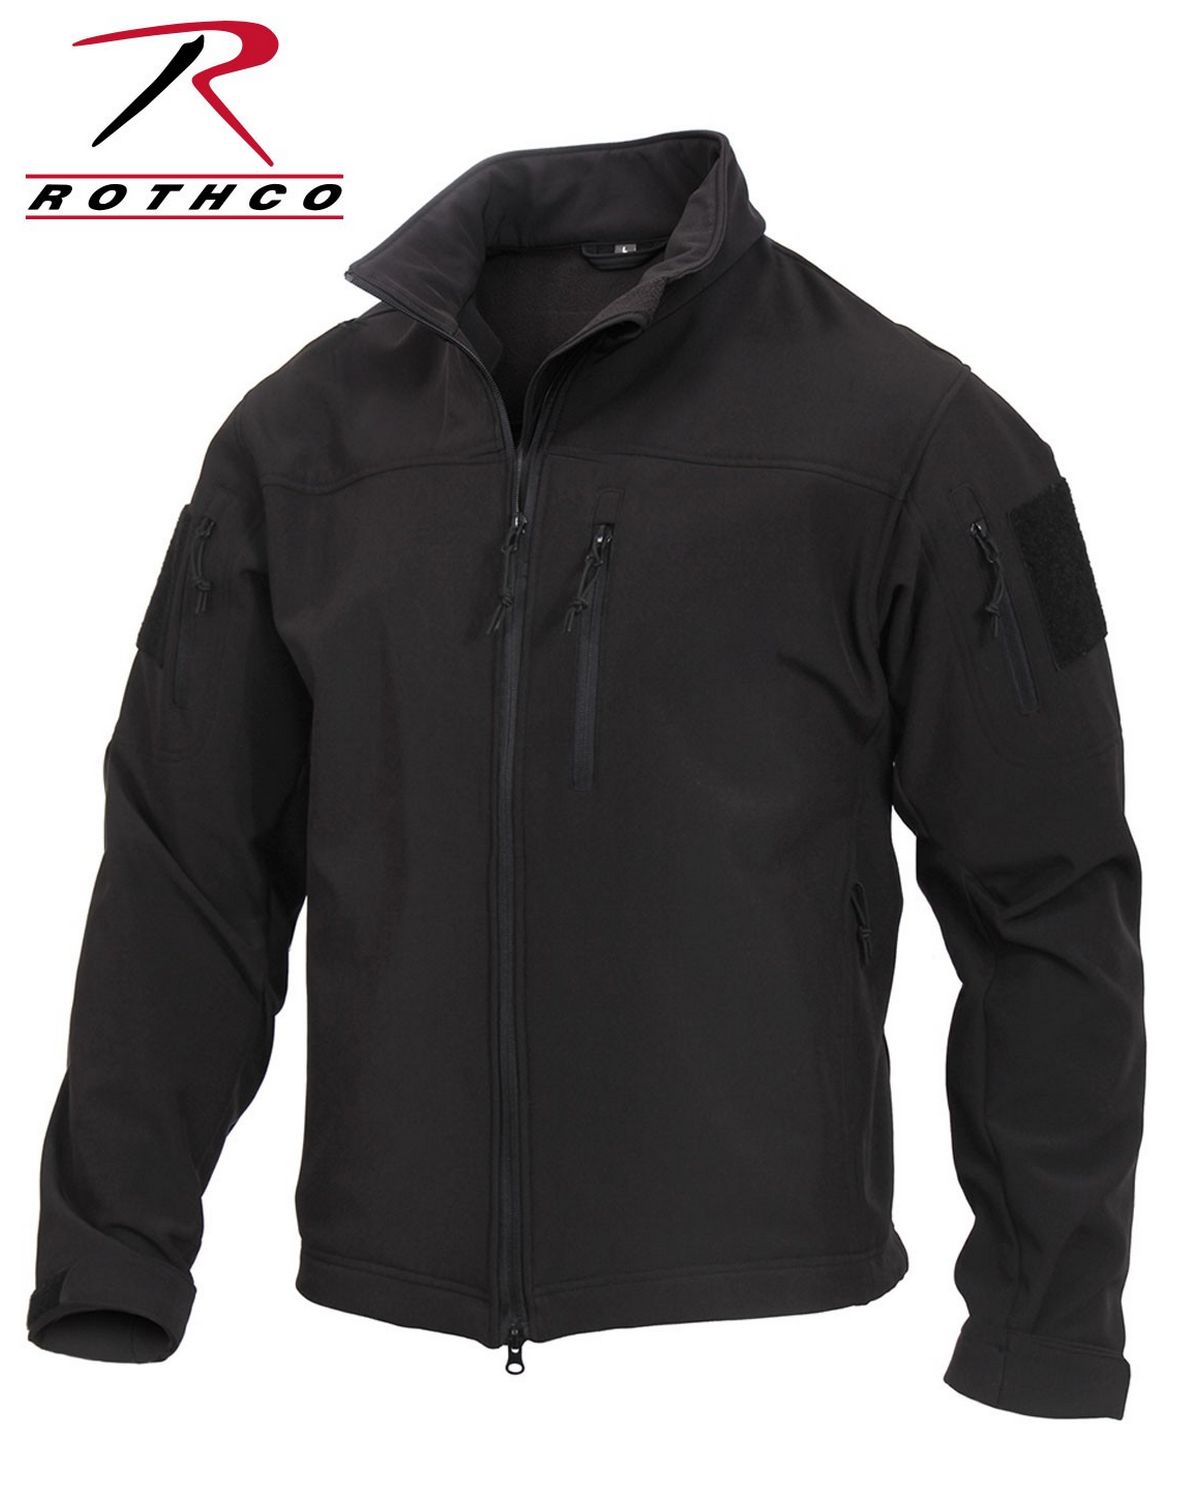 Rothco 3577 Stealth Ops Soft Shell Tactical Jacket